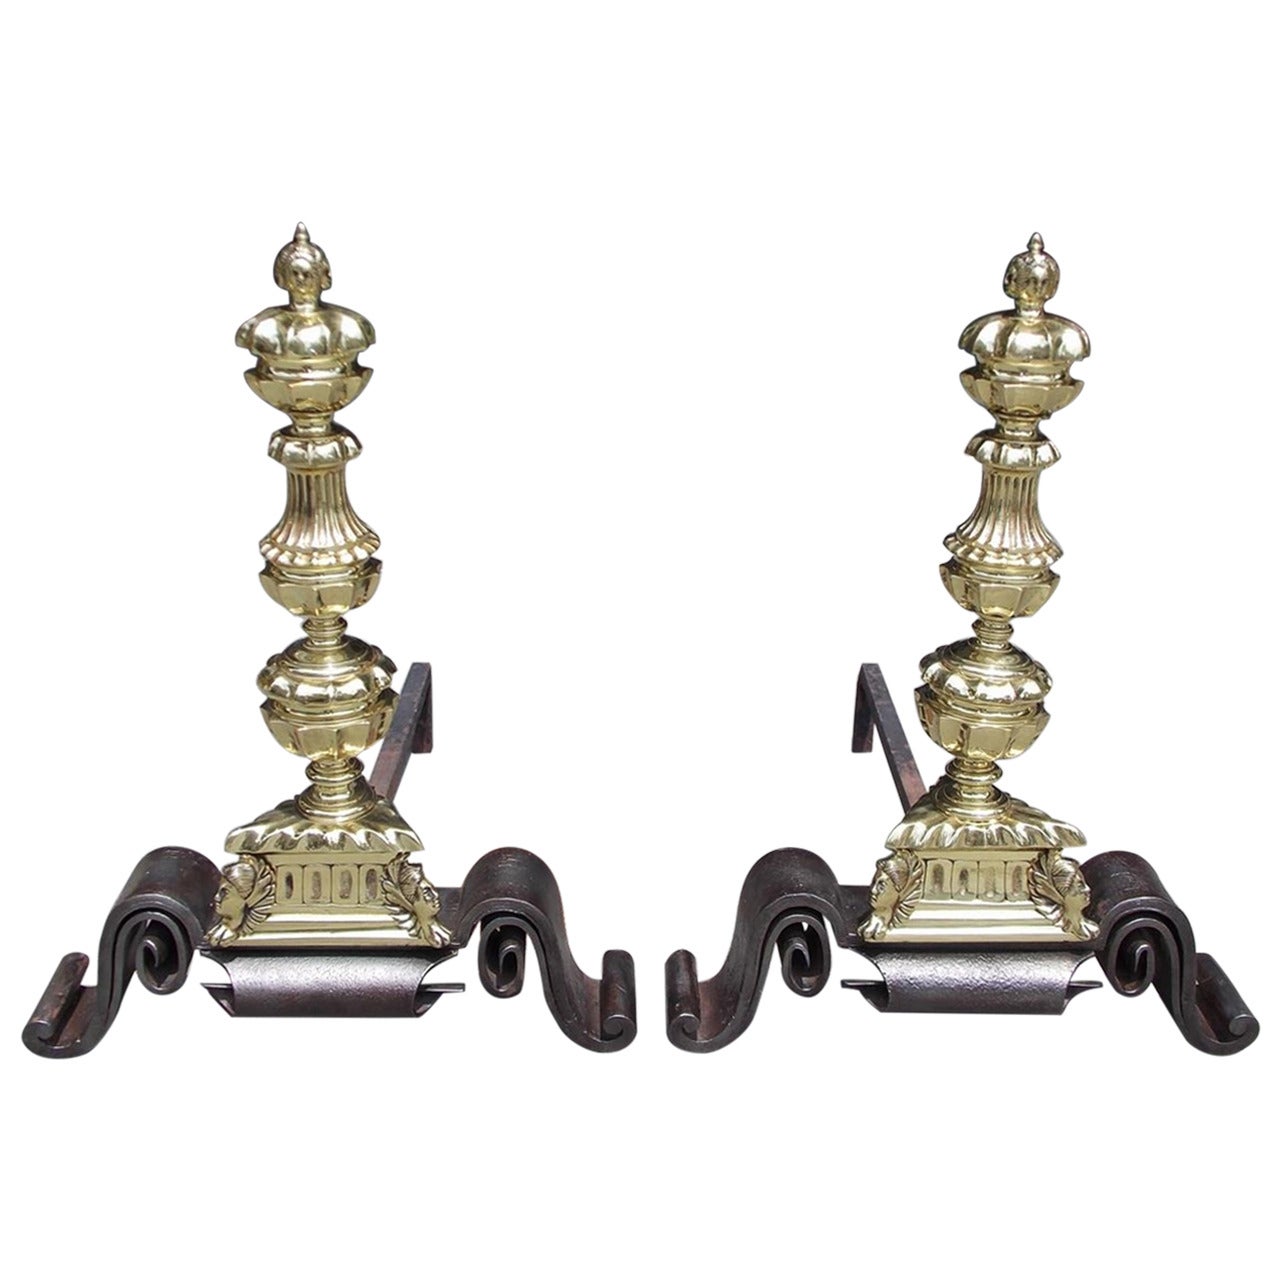 Pair of English Decorative Brass and Wrought Iron Andirons, Circa 1750 For Sale